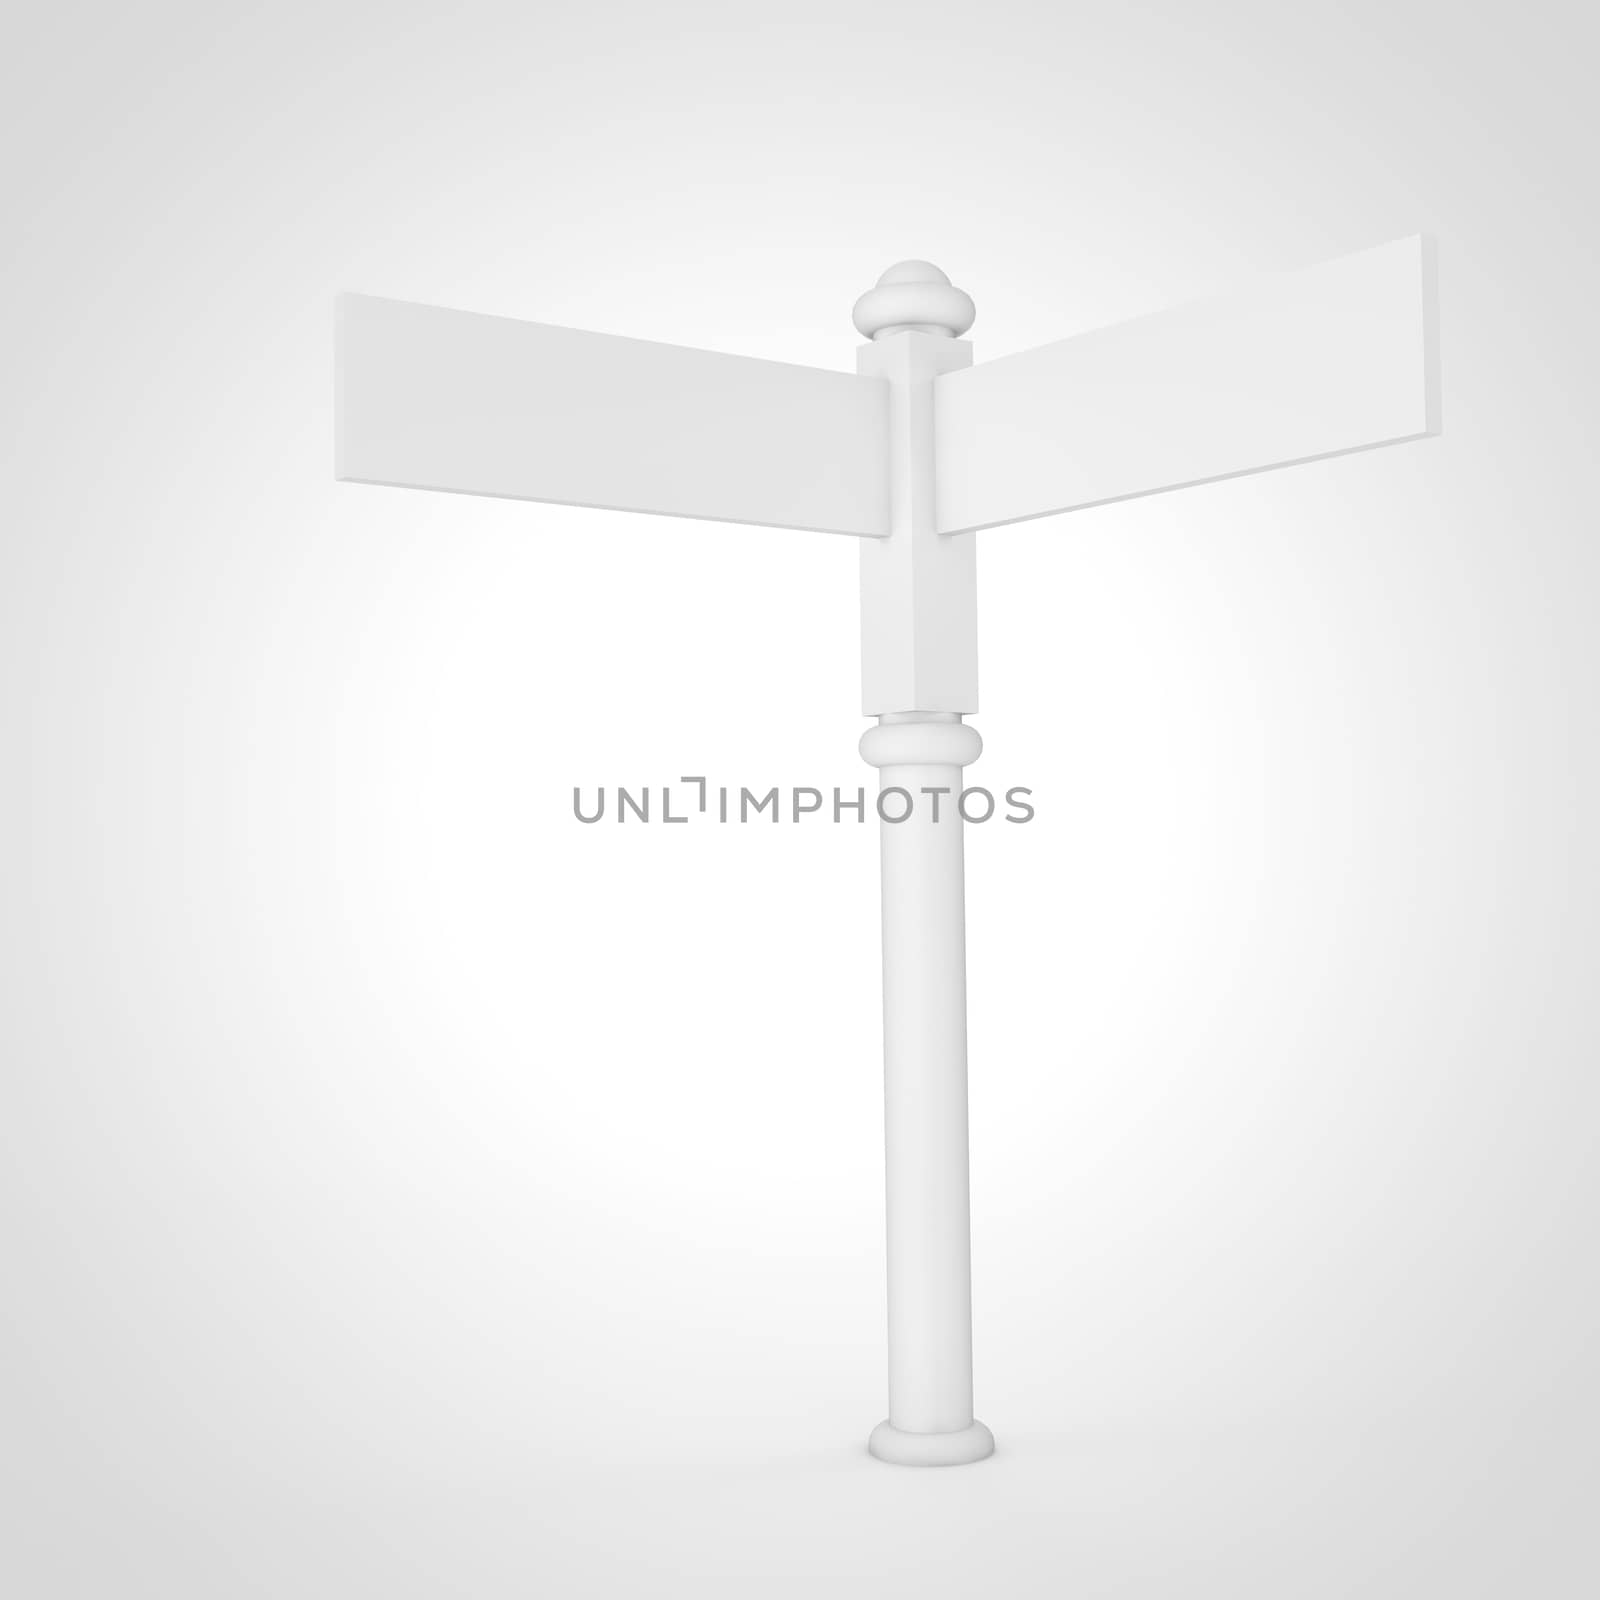 High resolution 3D render of a blank sign post in white.